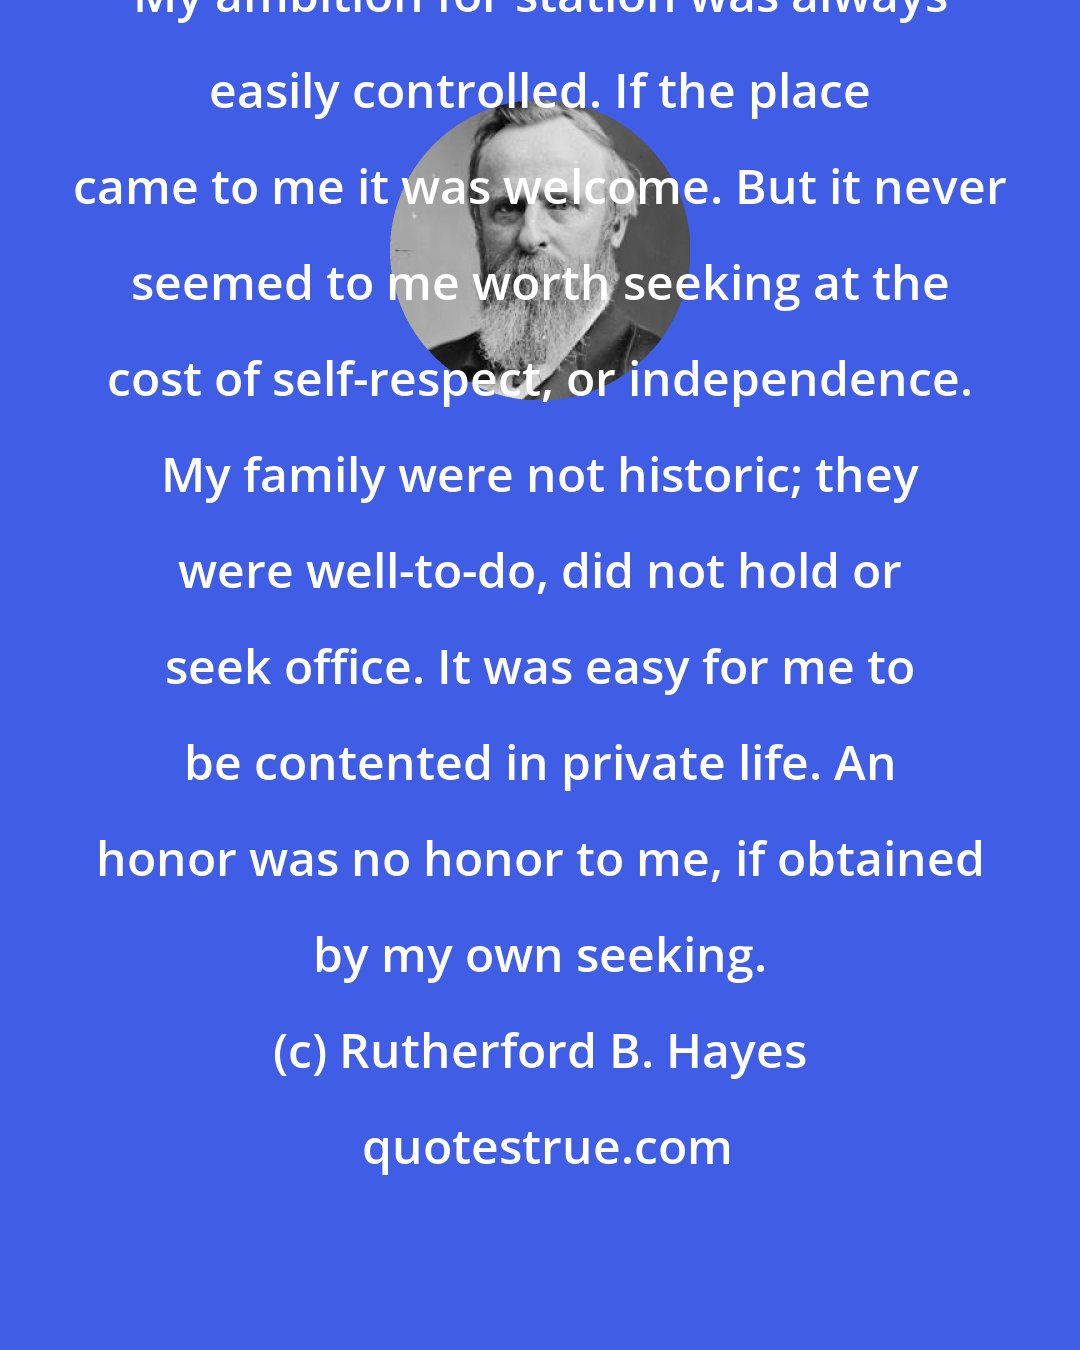 Rutherford B. Hayes: My ambition for station was always easily controlled. If the place came to me it was welcome. But it never seemed to me worth seeking at the cost of self-respect, or independence. My family were not historic; they were well-to-do, did not hold or seek office. It was easy for me to be contented in private life. An honor was no honor to me, if obtained by my own seeking.